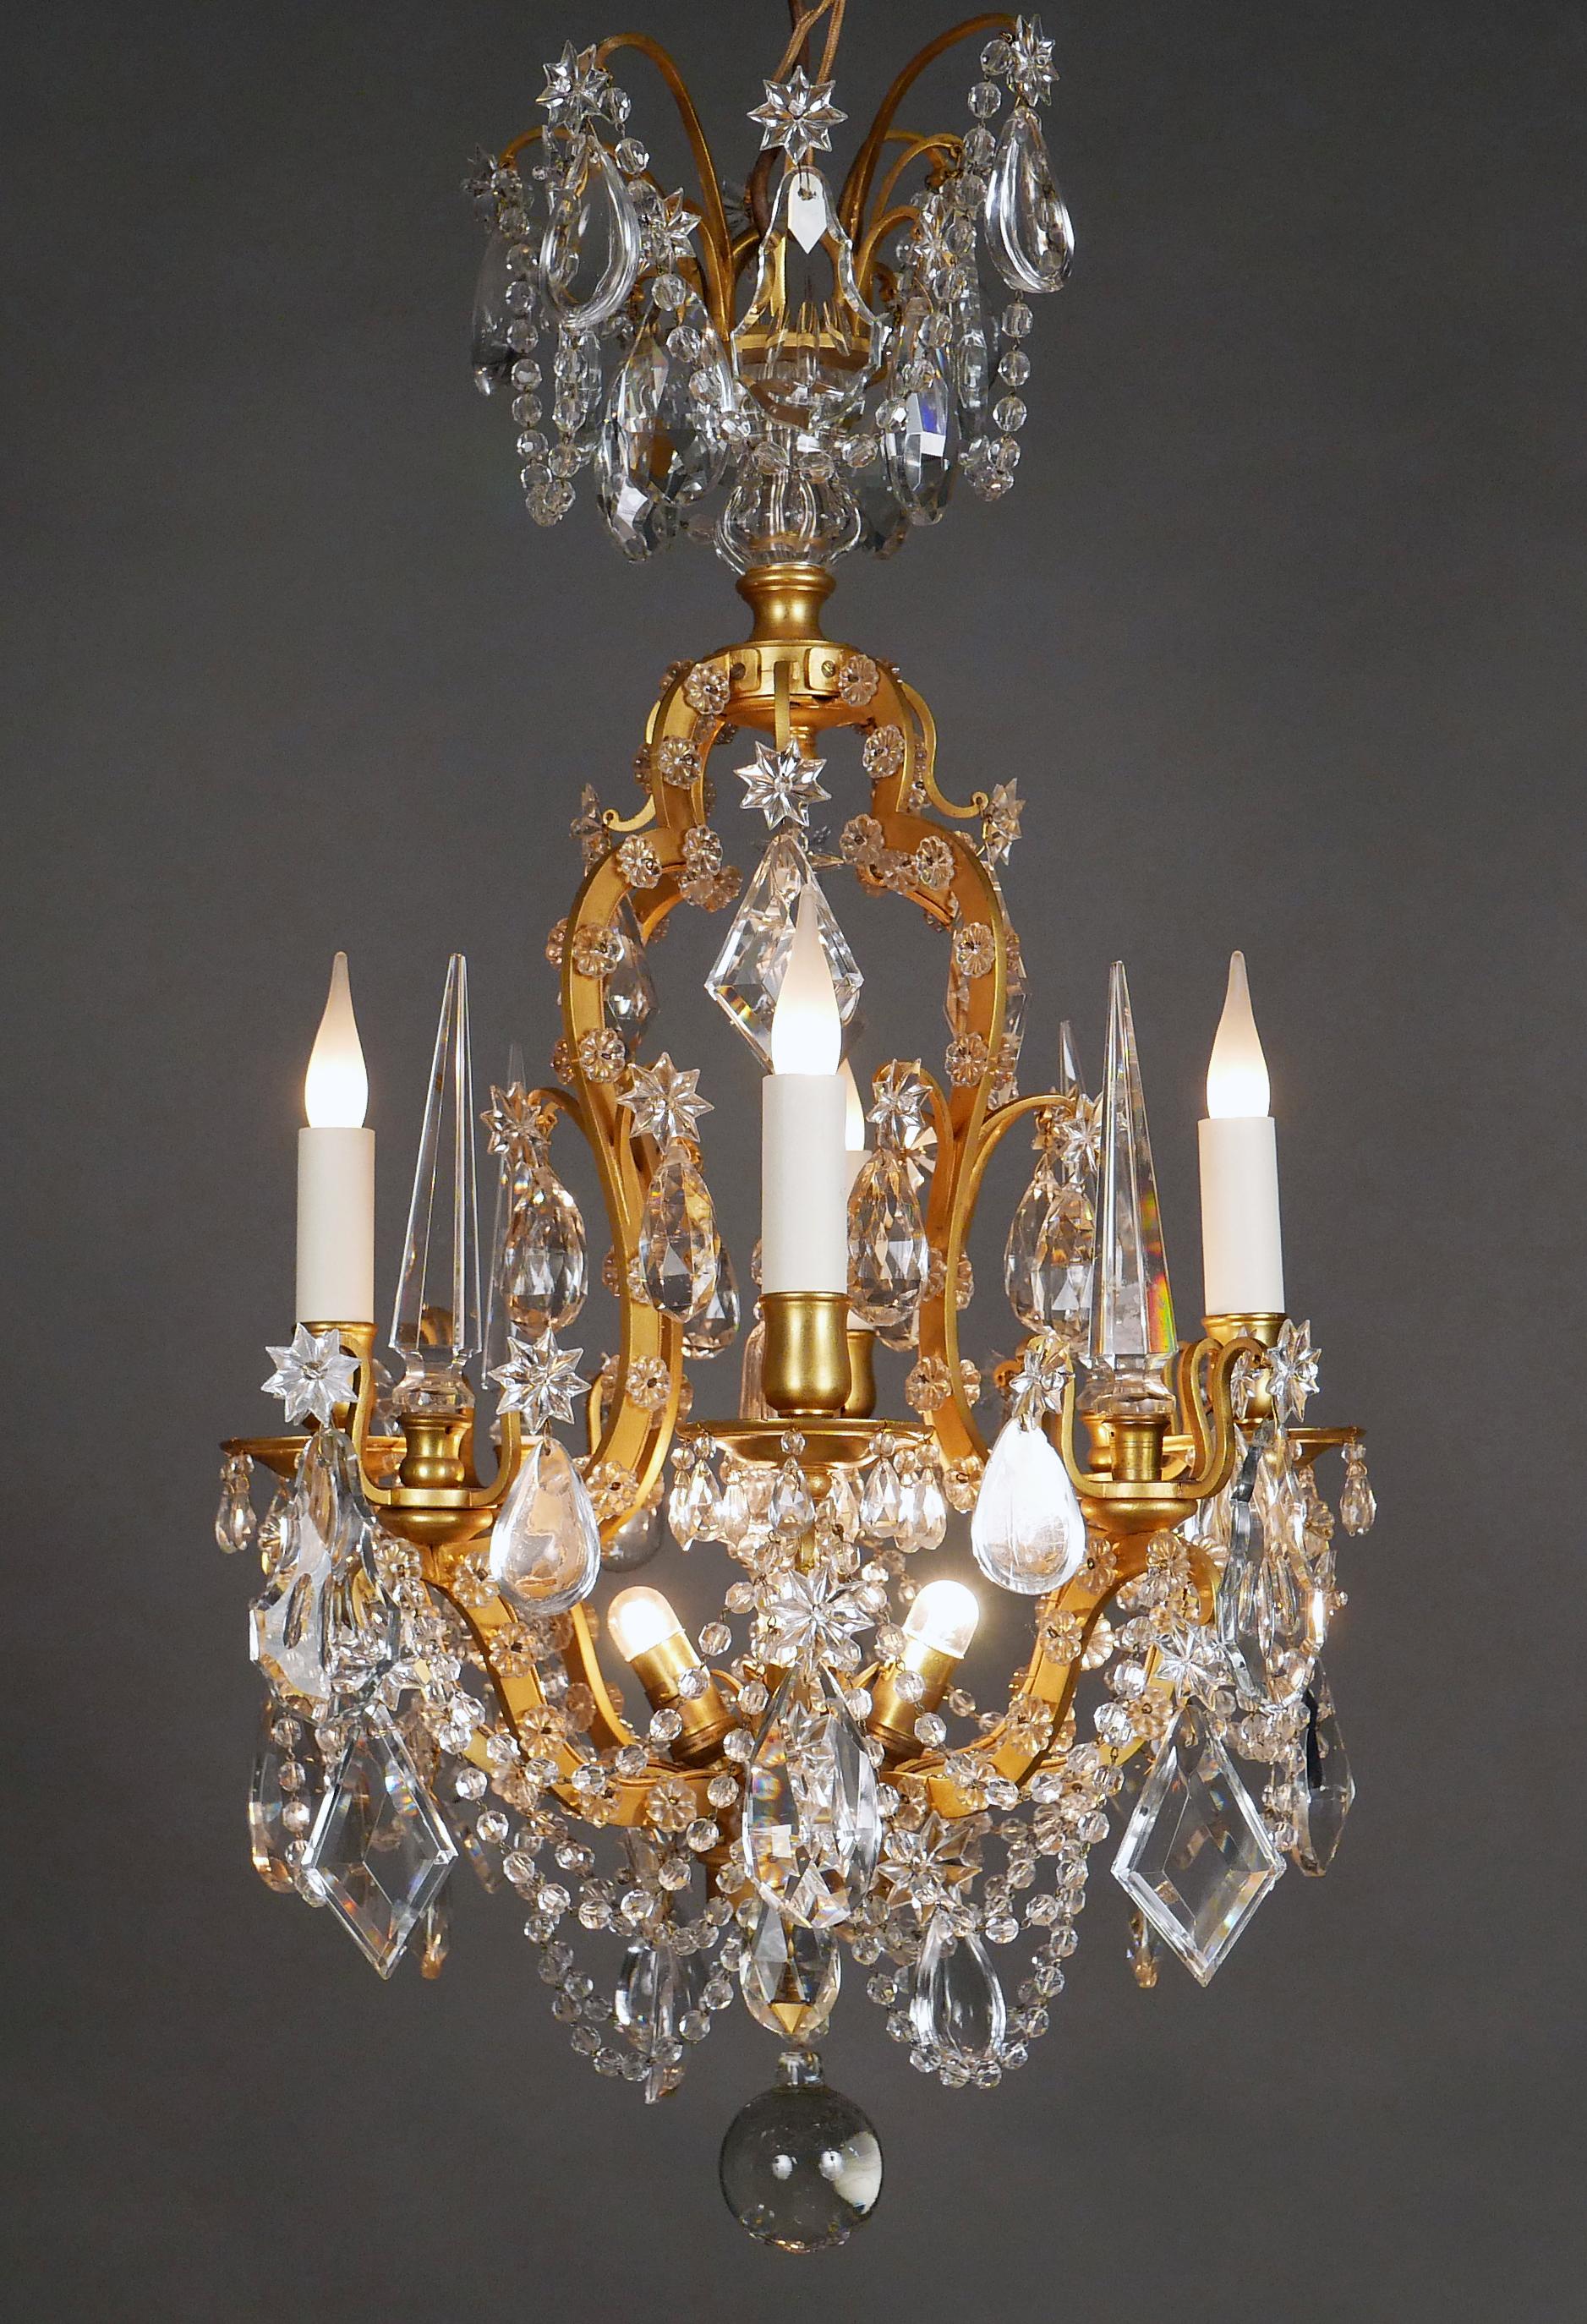 Charming Louis XVI style « cage » shaped chandelier in gilded bronze and cut crystal, with four lights. Many cut crystal pendants, daggers, prisms and flowers adorned the whole, connected with garlands of pearls. An indirect lighting system reveals